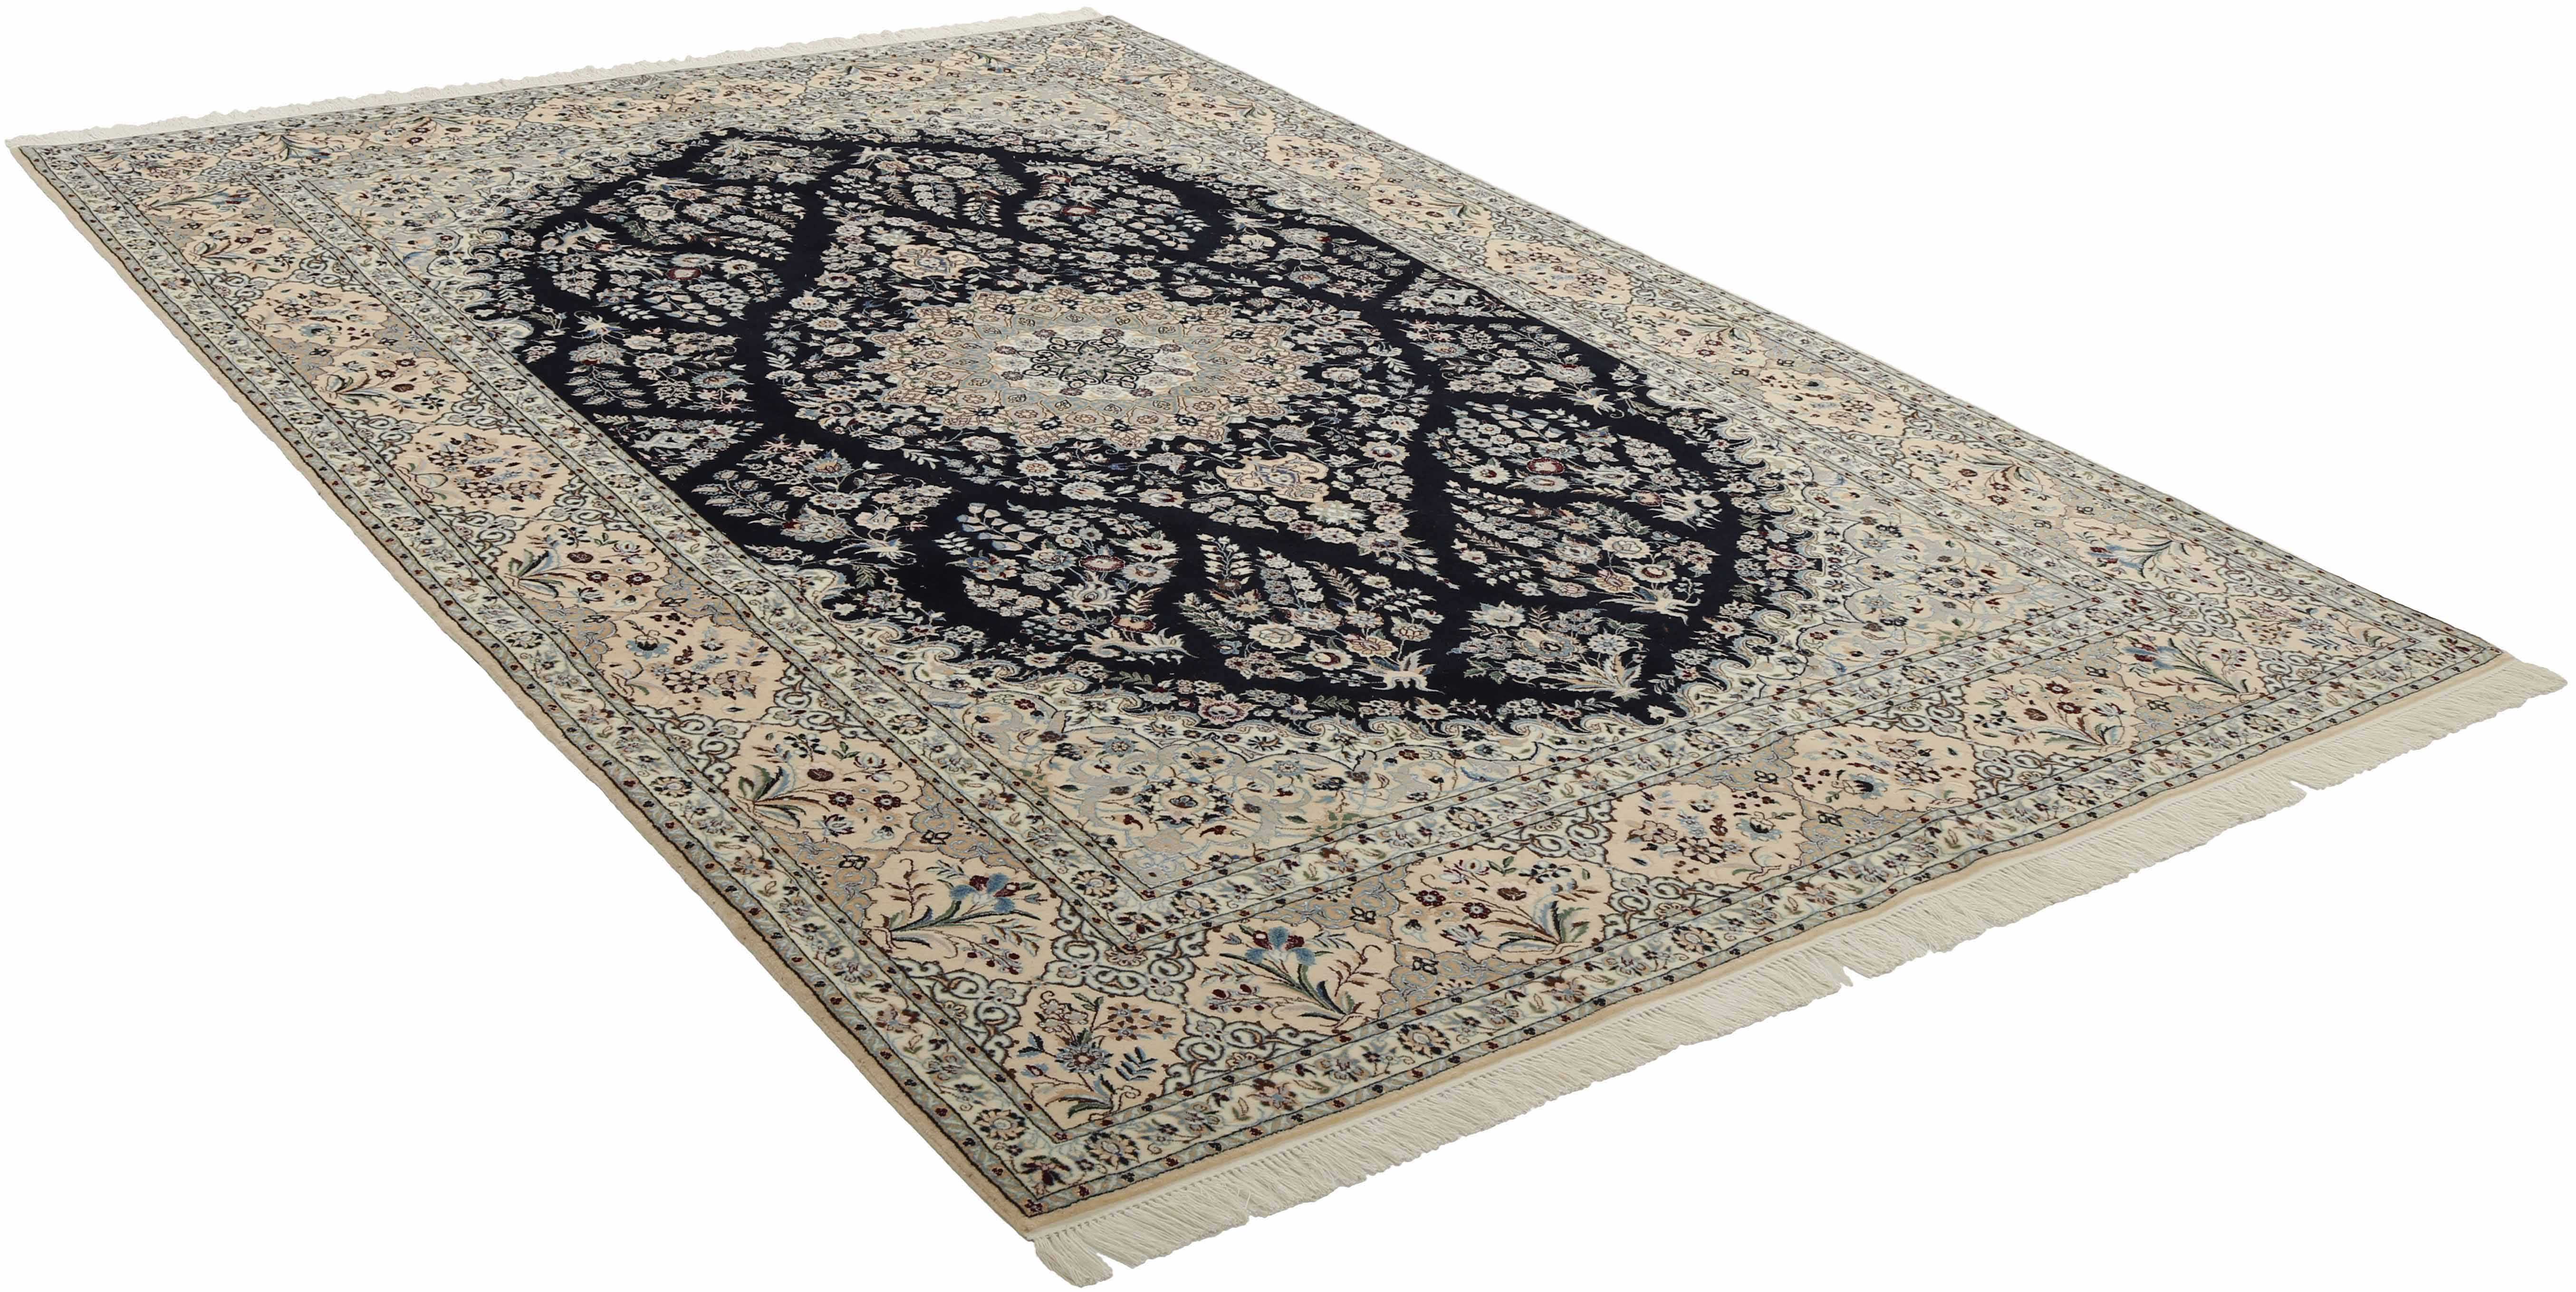 Authentic oriental rug with traditional floral design in black